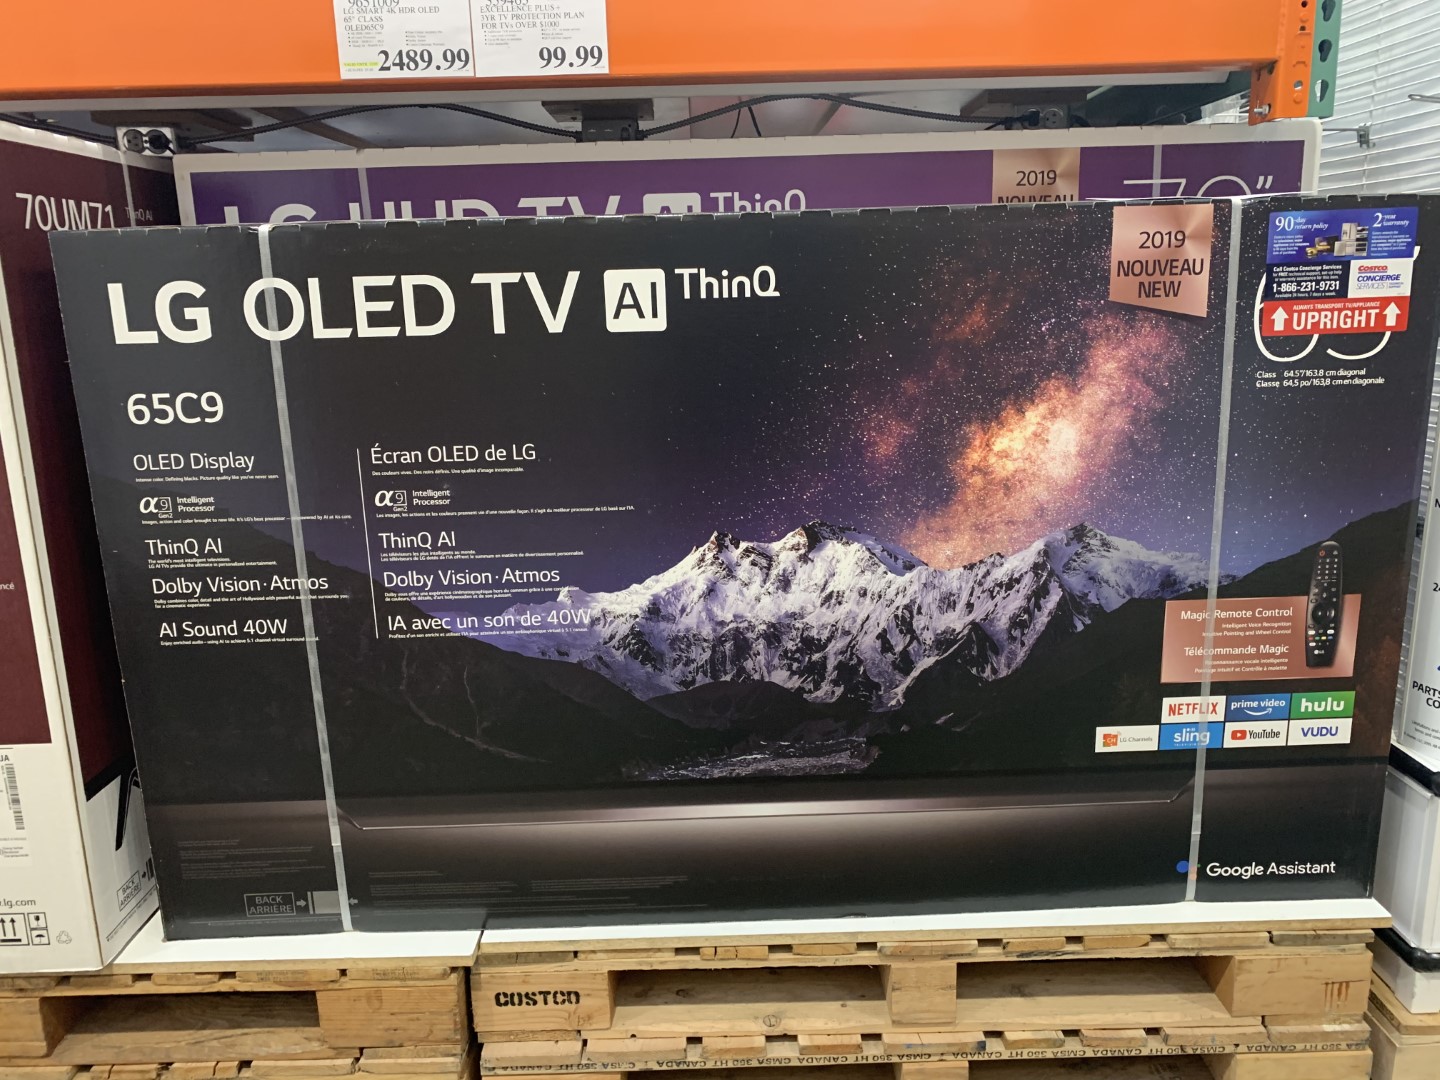 Costco Fall Aisle 2019 Superpost! Black Friday Televisions - Costco West Fan Blog